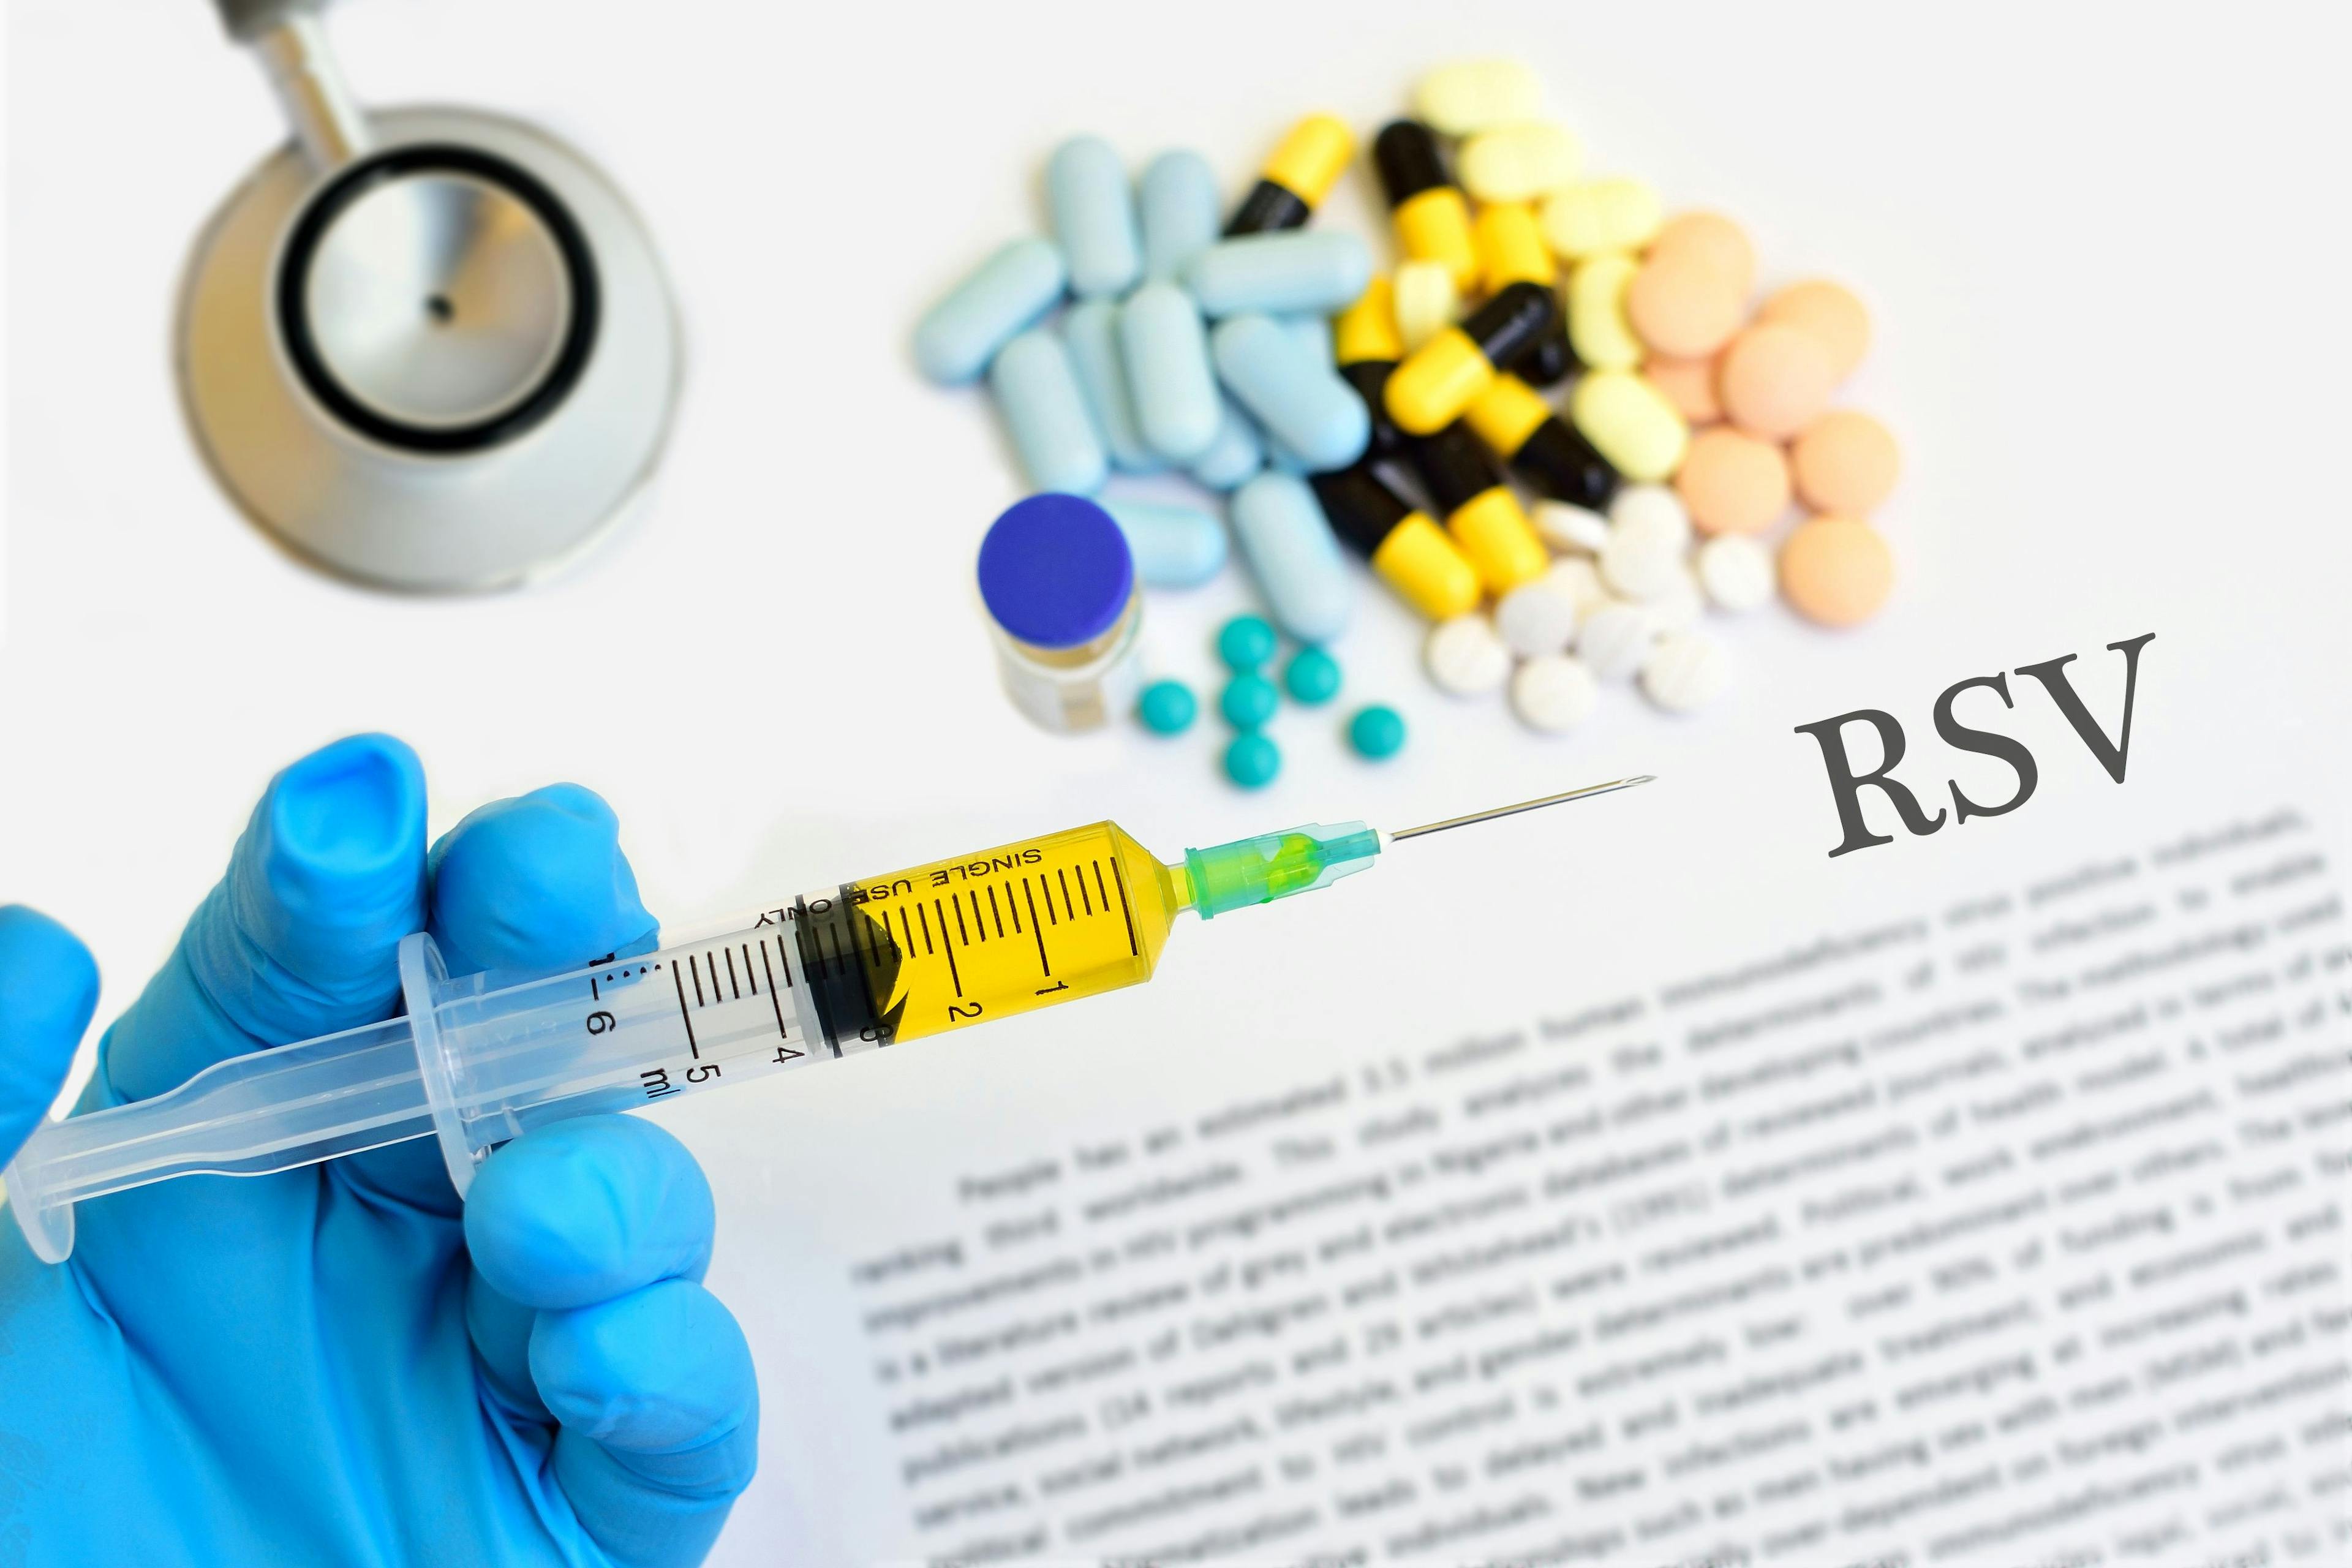 Breaking: CDC ACIP Recommends RSV Vaccination for Older Adults